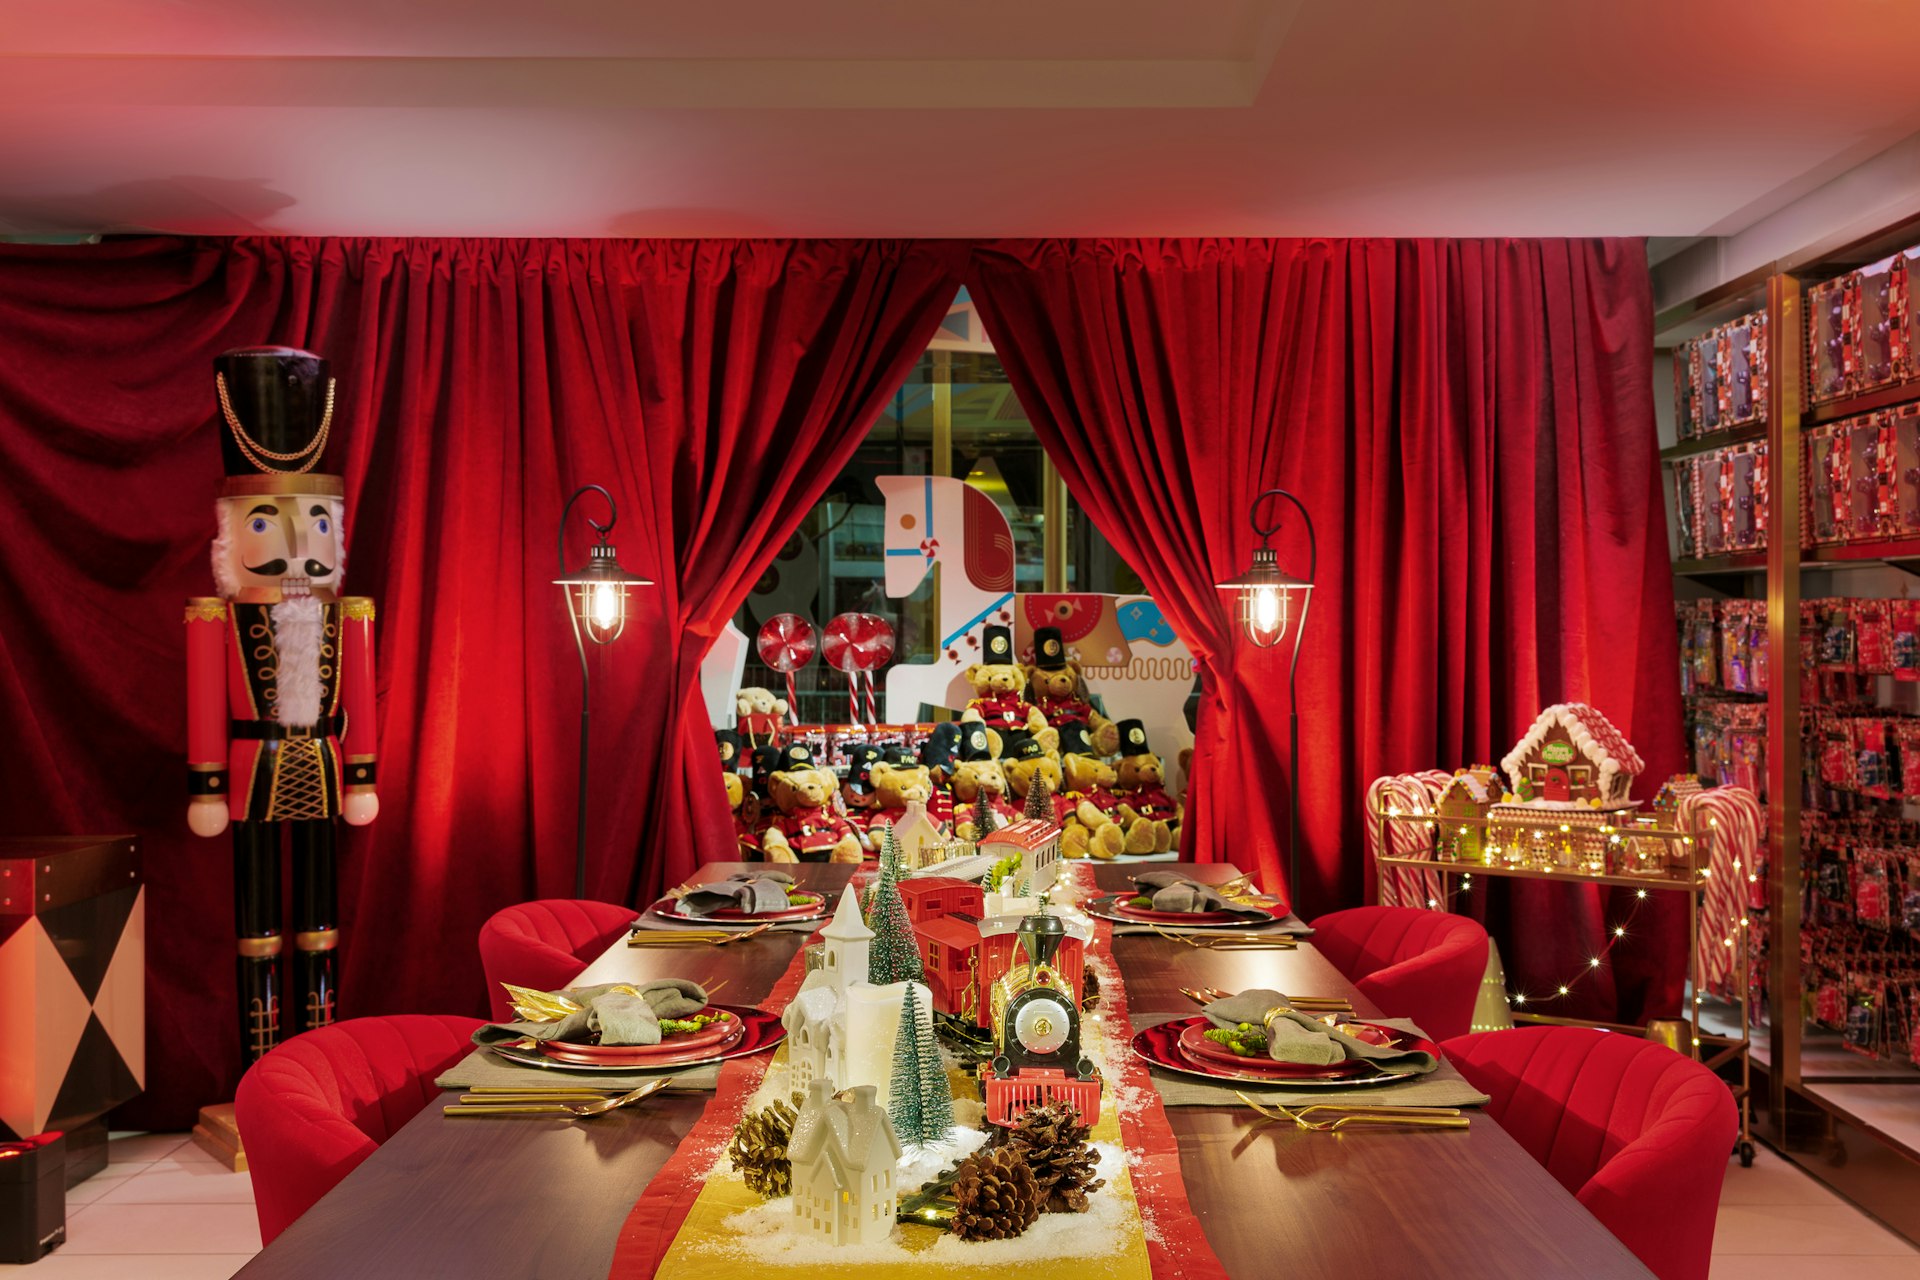 FAO Schwarz dining room with a festive table display